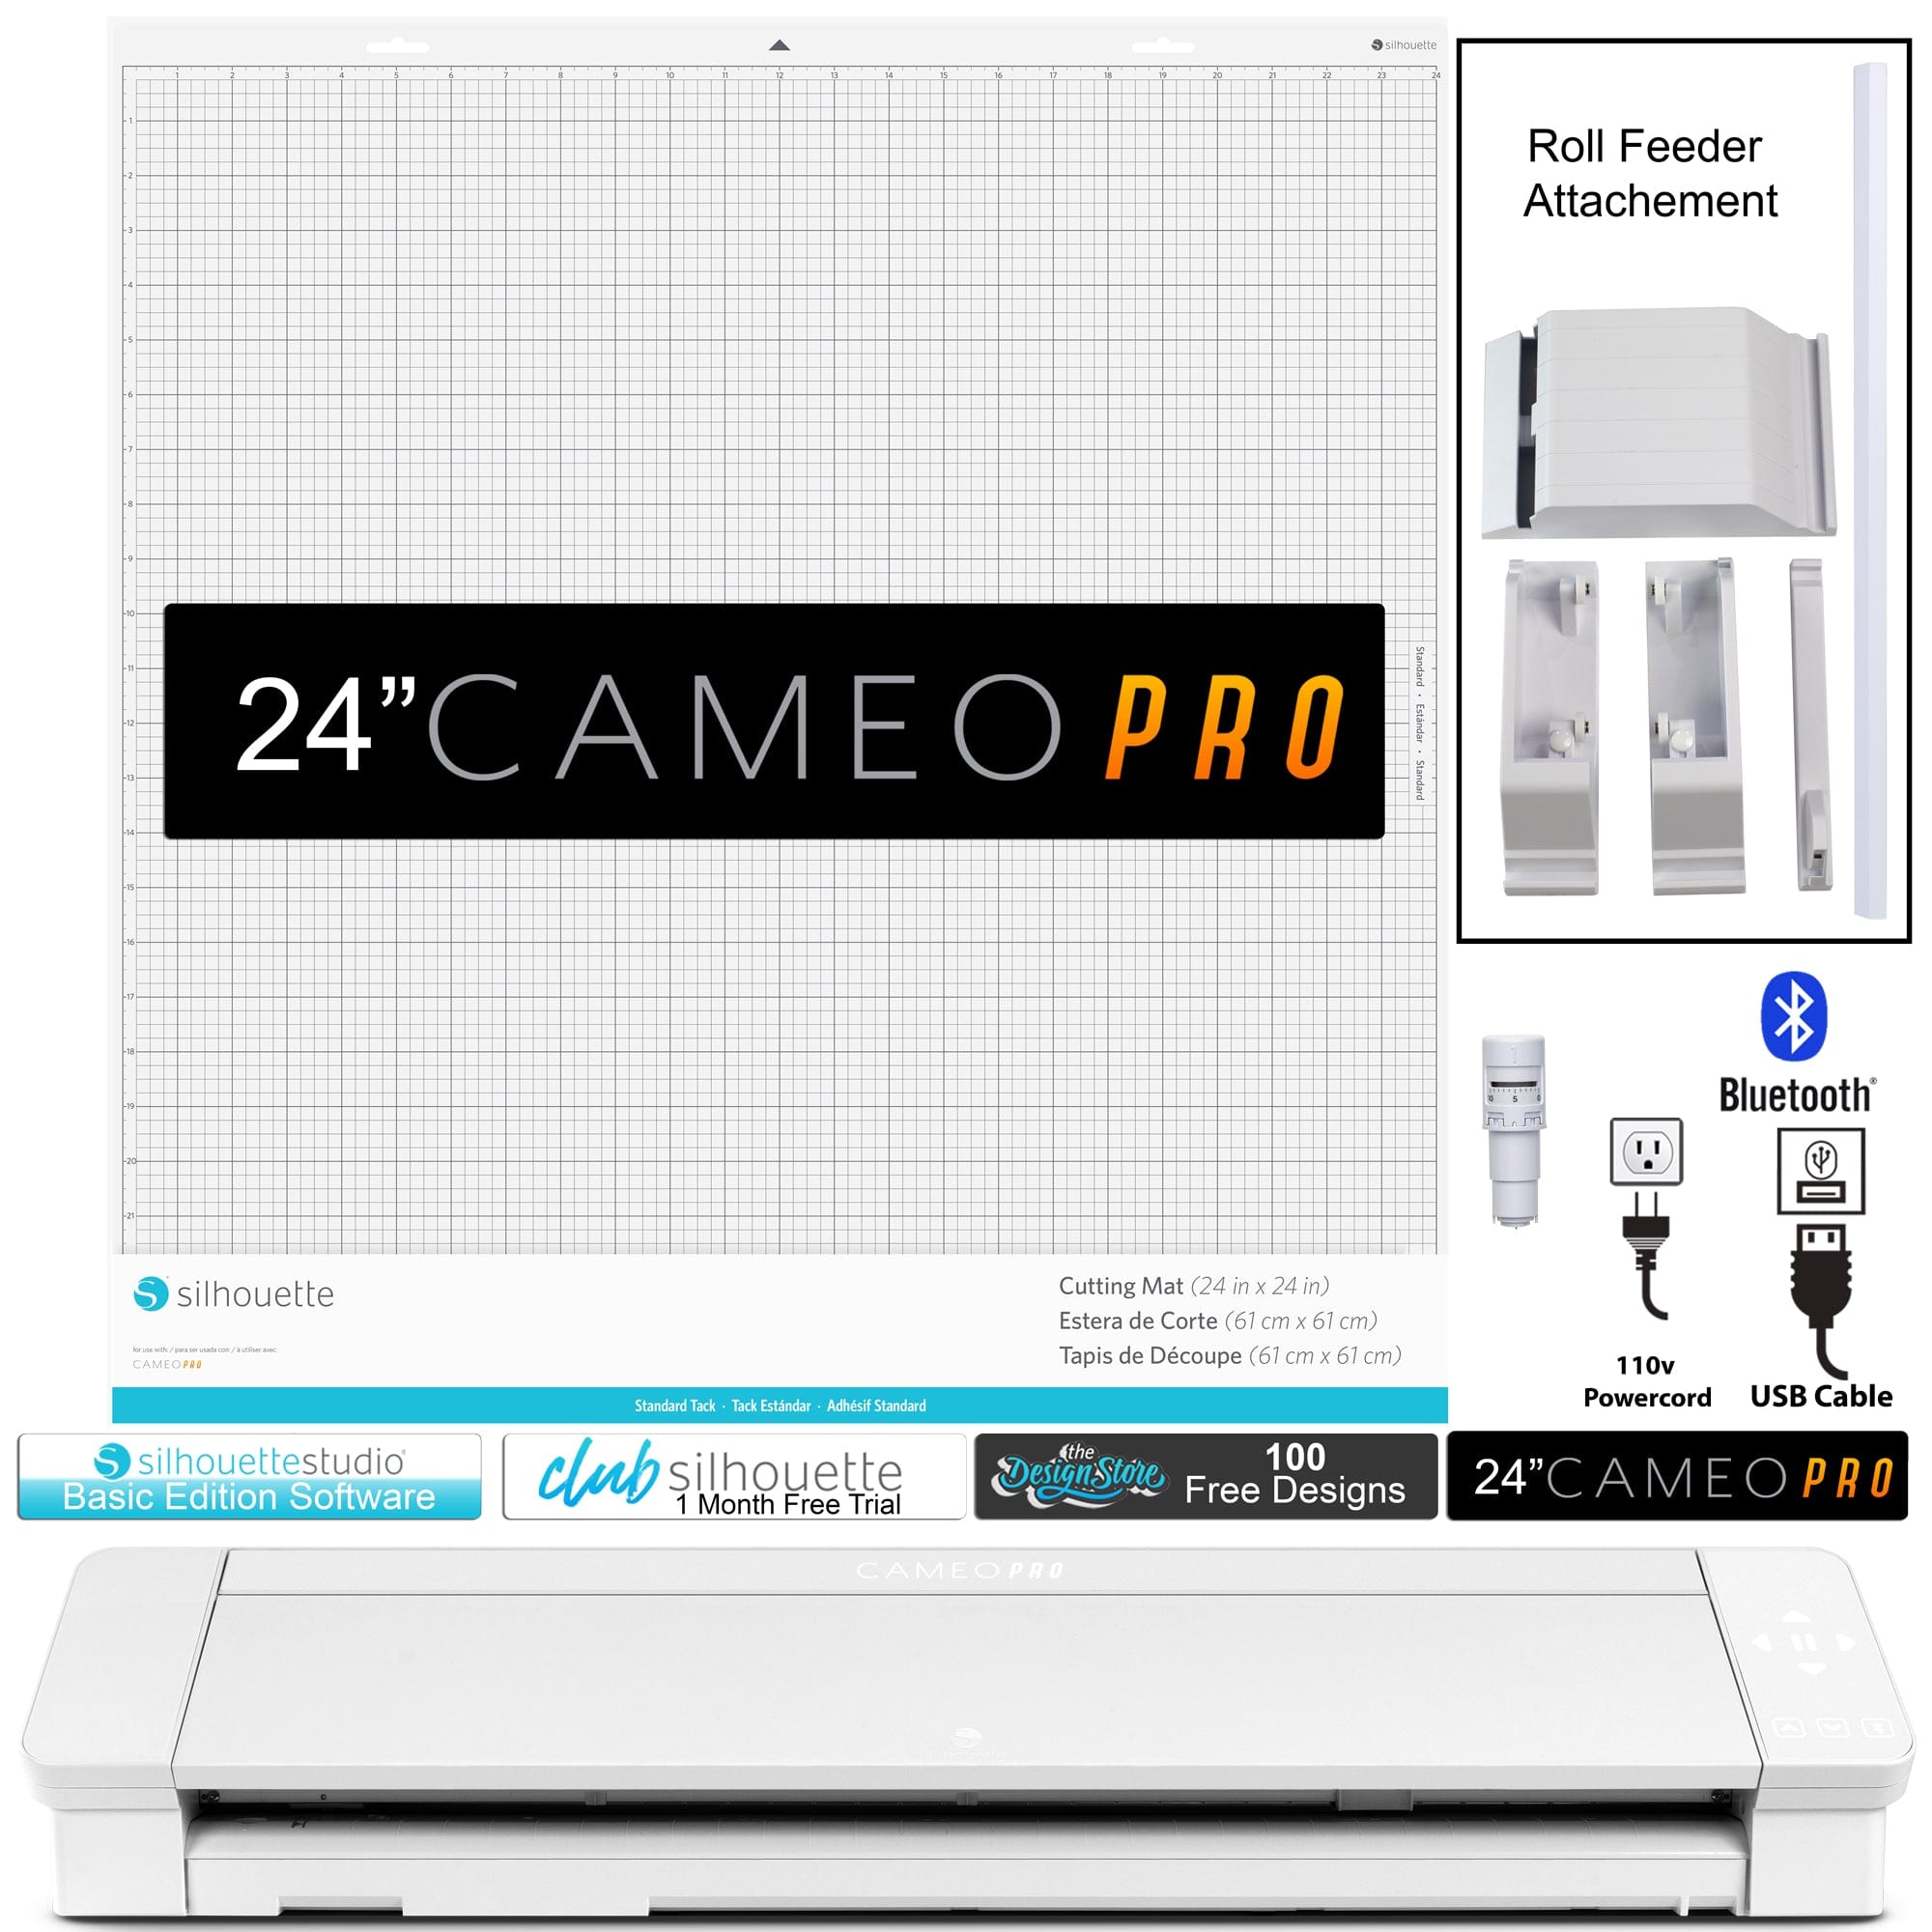 Silhouette Cameo 4 PRO - 24 w/ Deluxe Blade & Tool Pack, Mat Pack, Guides